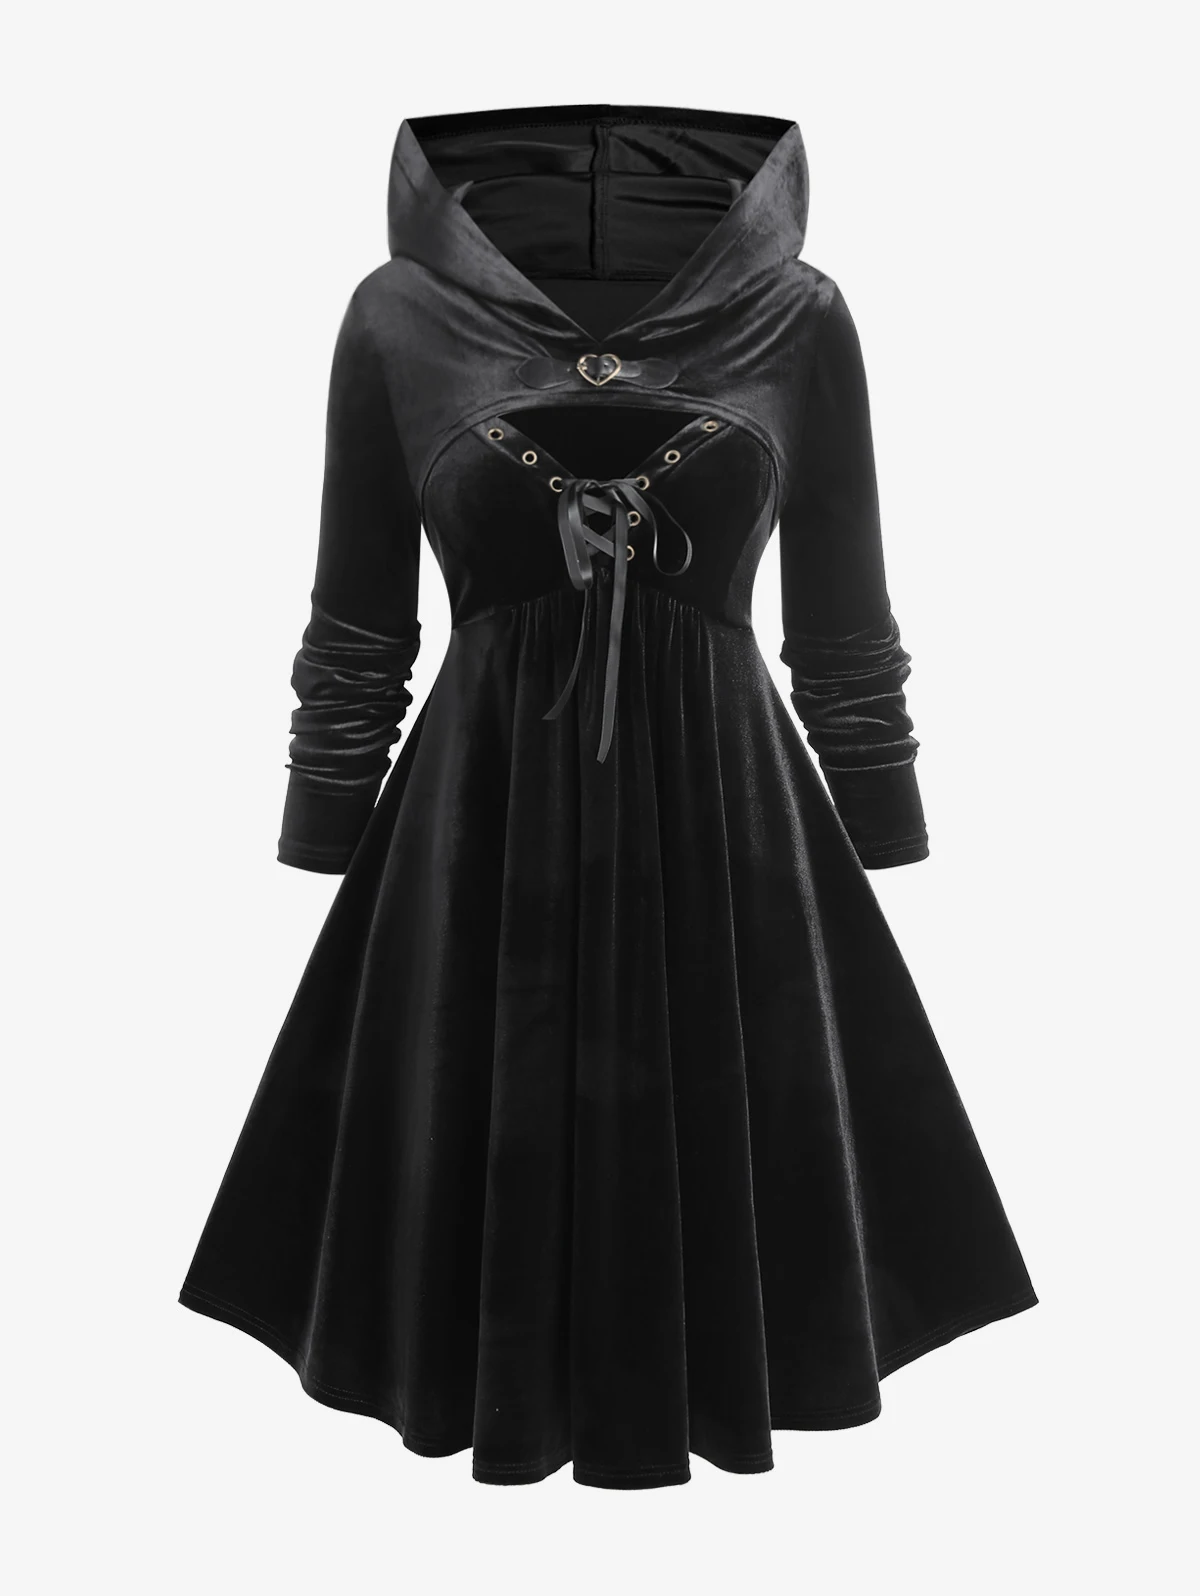 

Plus Size Lace-up Grommets Velvet Cami Dress And Hooded Cropped Top Women Winter Vestidos Black Dresses Robe Two Pieces